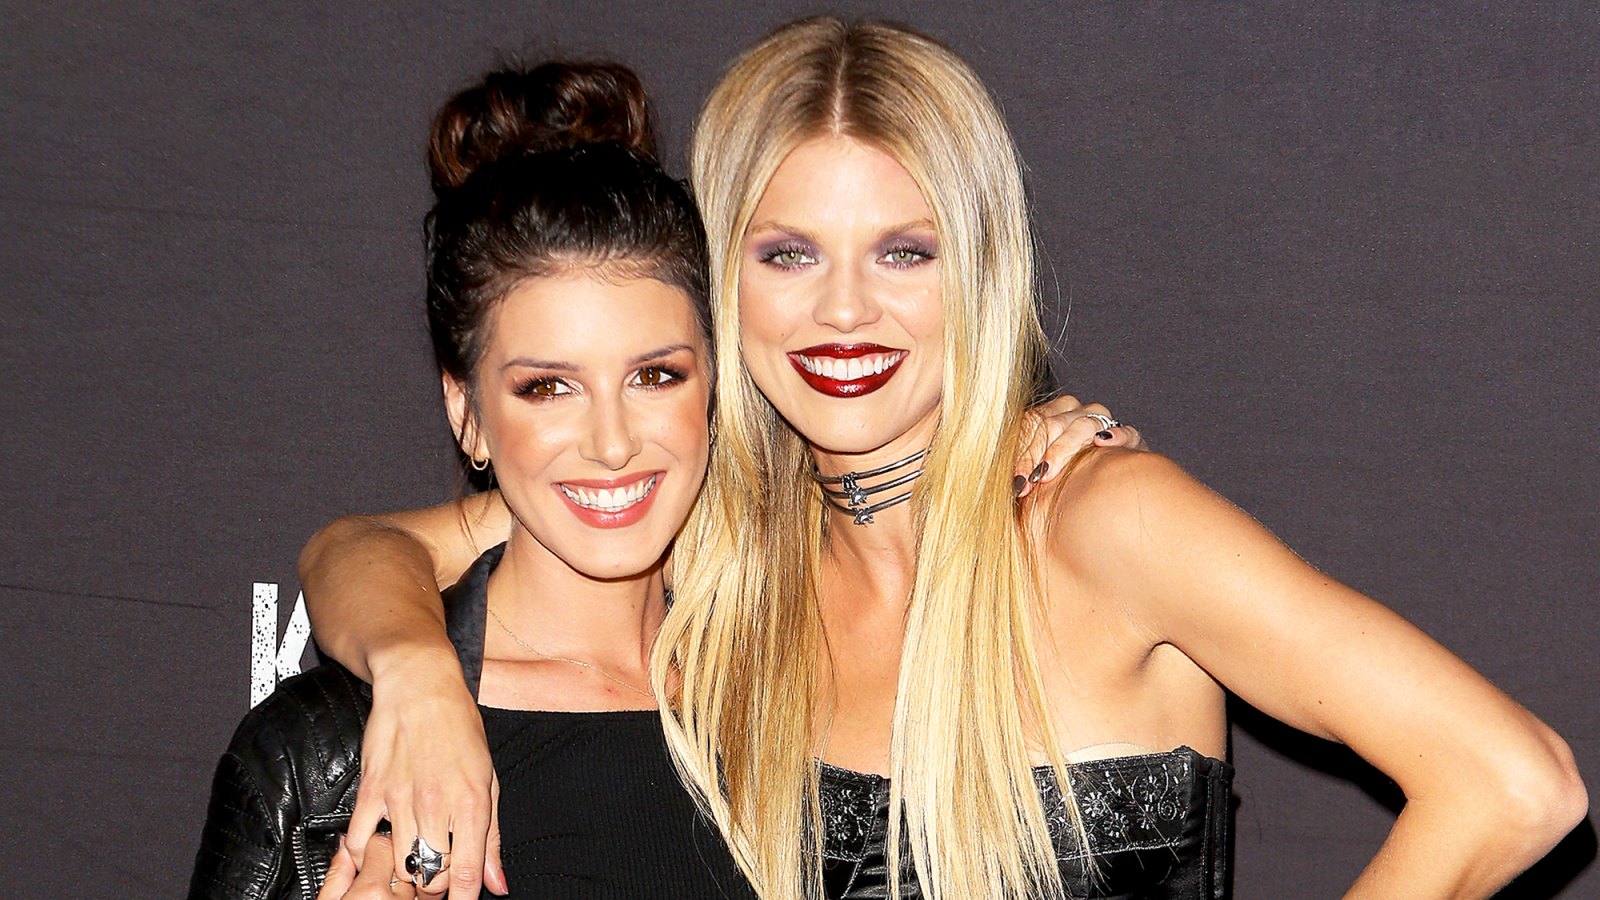 Shenae Grimes and AnnaLynne McCord arrive at the Knott's Scary Farm Black Carpet 2016 Event held at Knott's Berry Farm in Buena Park, California.